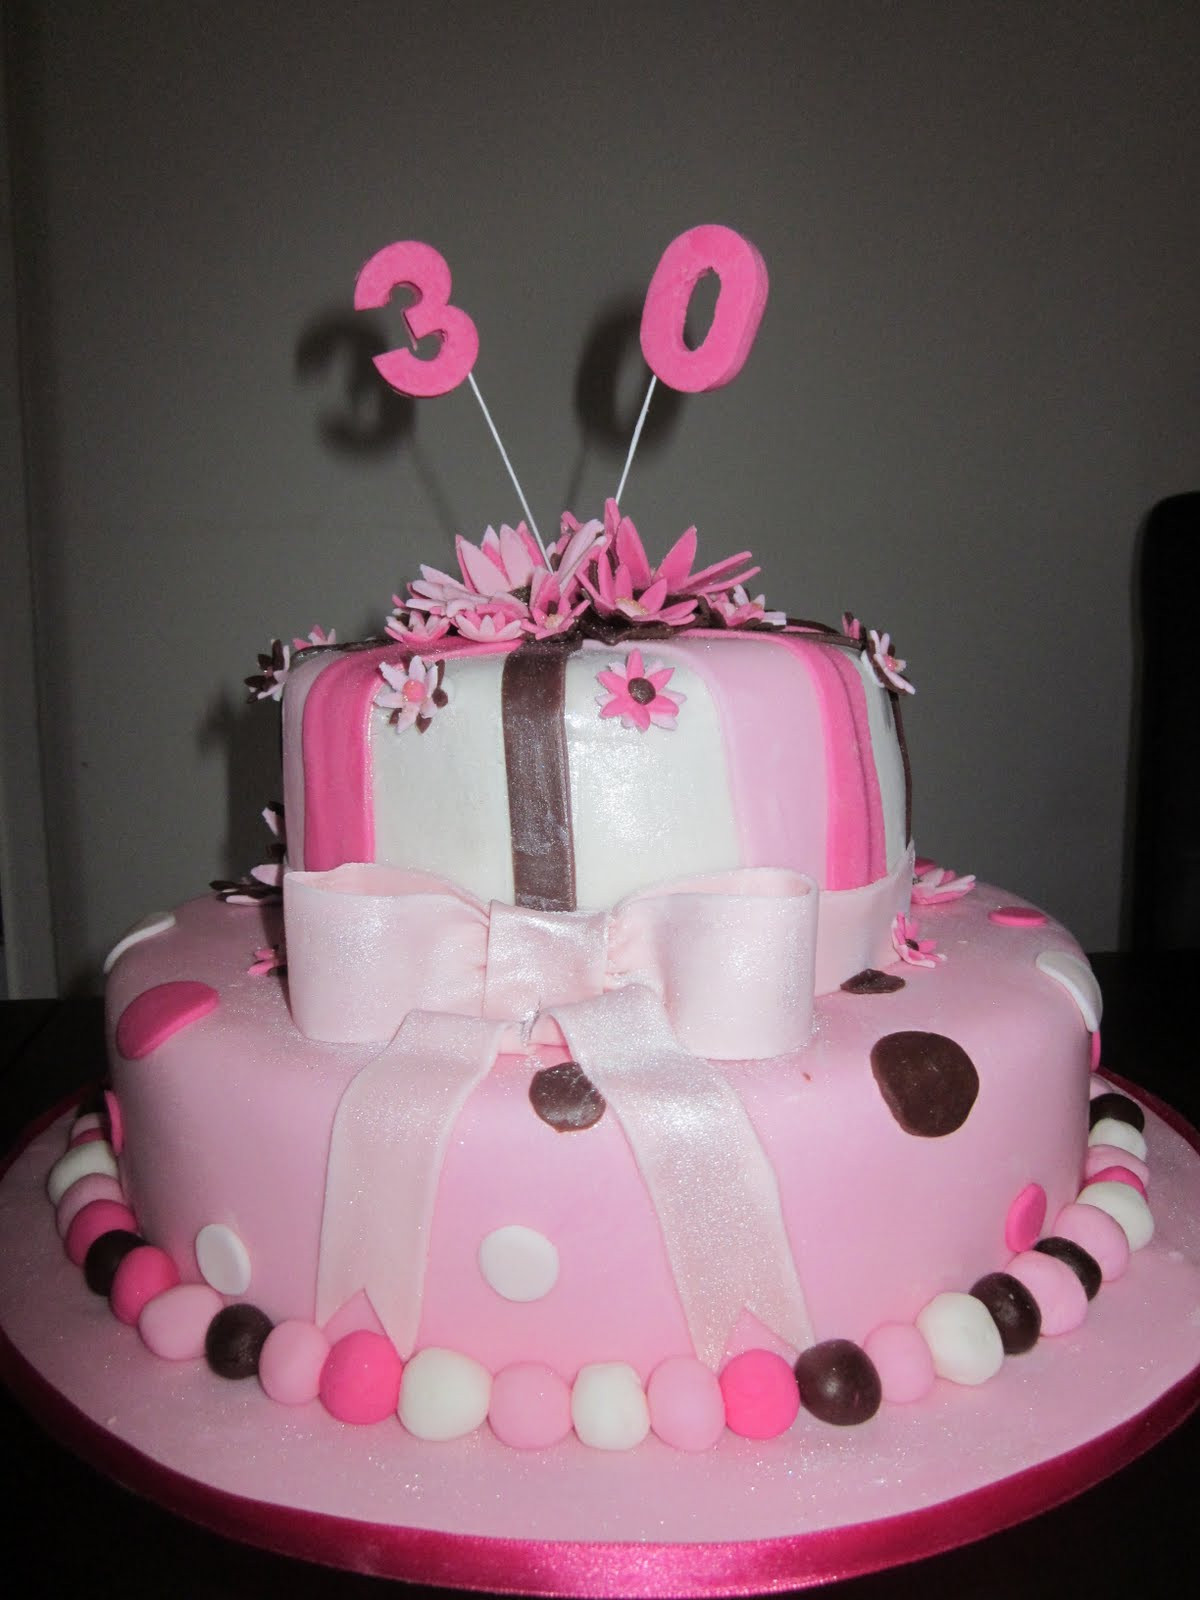 30th Birthday Cake Ideas For Her
 Deb s Cakes and Cupcakes Females 30th Birthday Cake